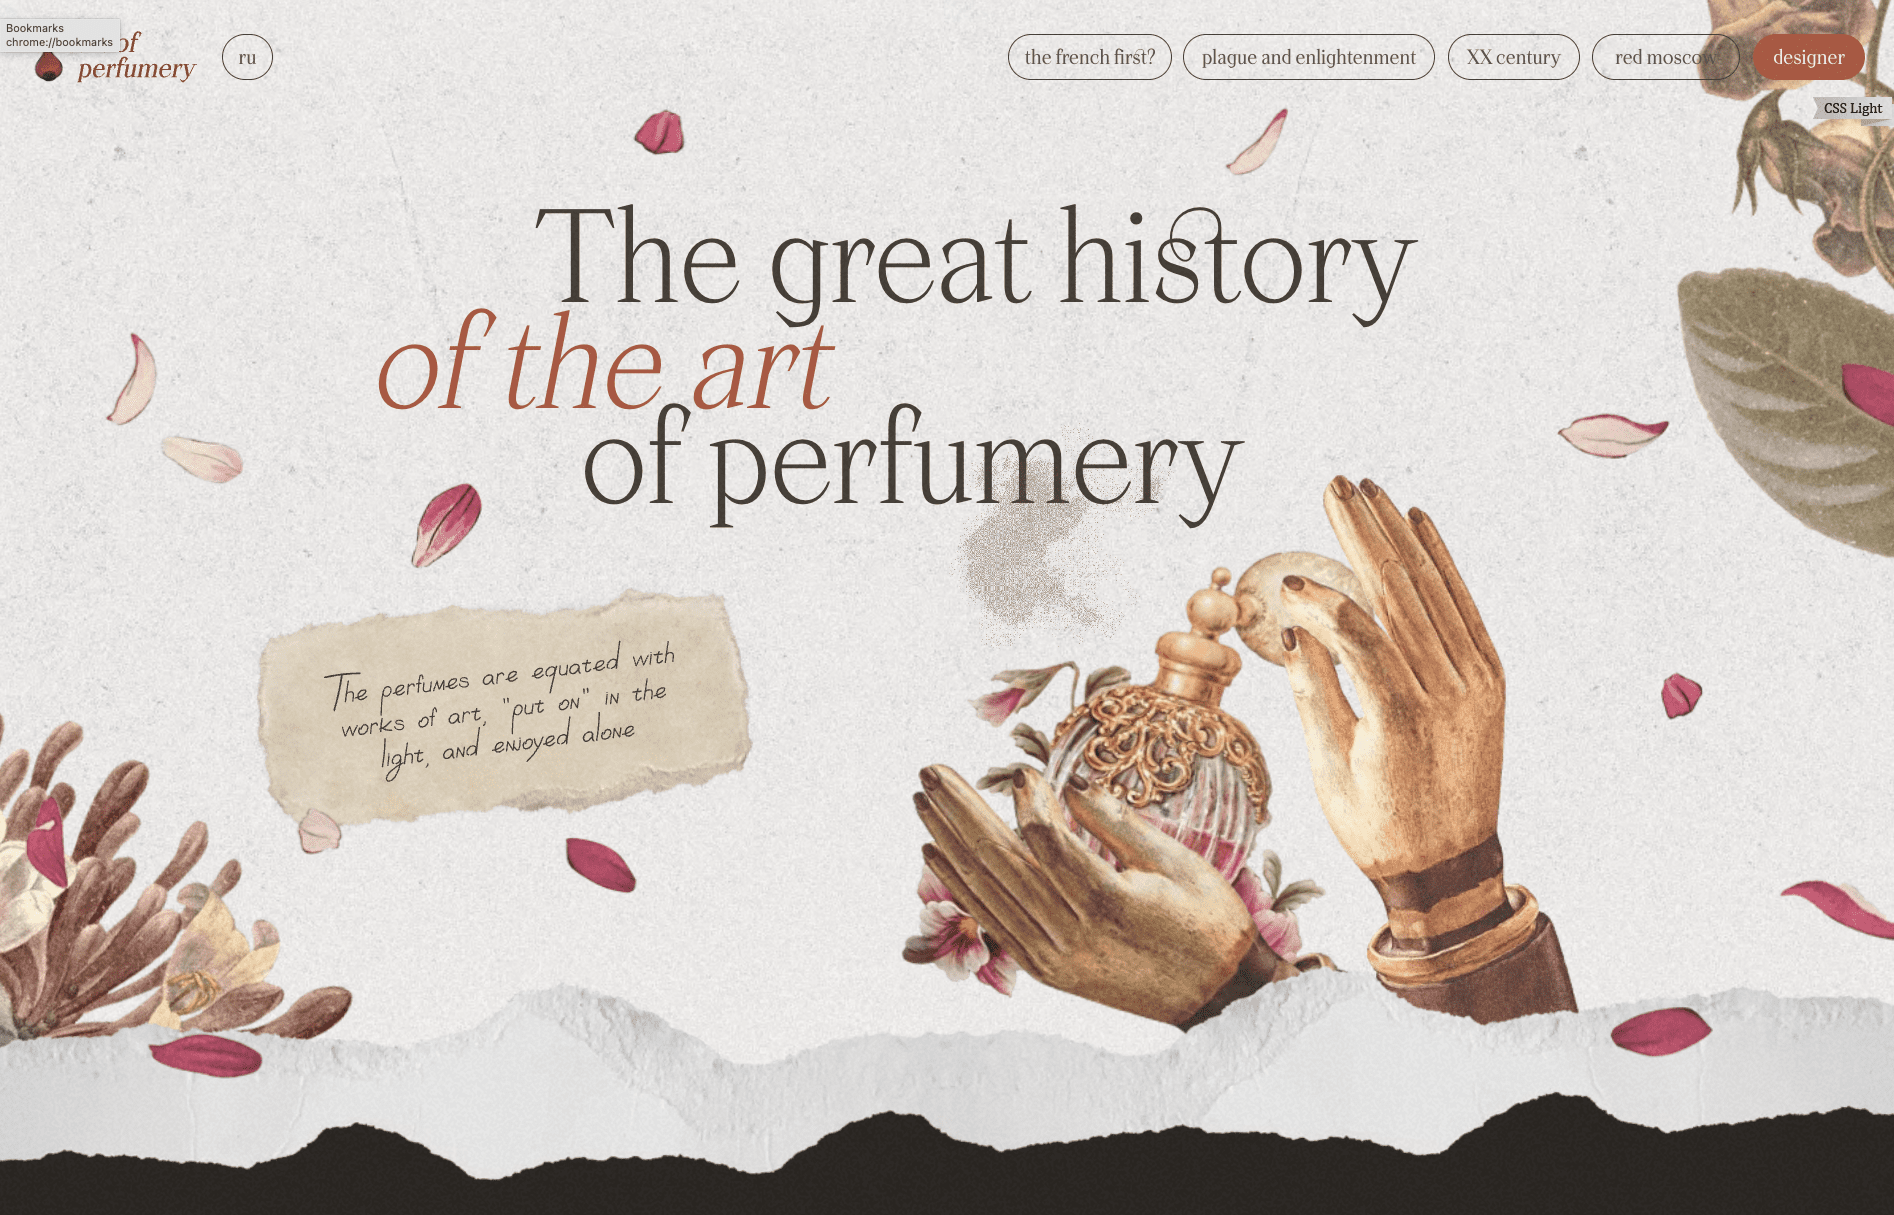 Perfumerion: The great history of the art of perfumery